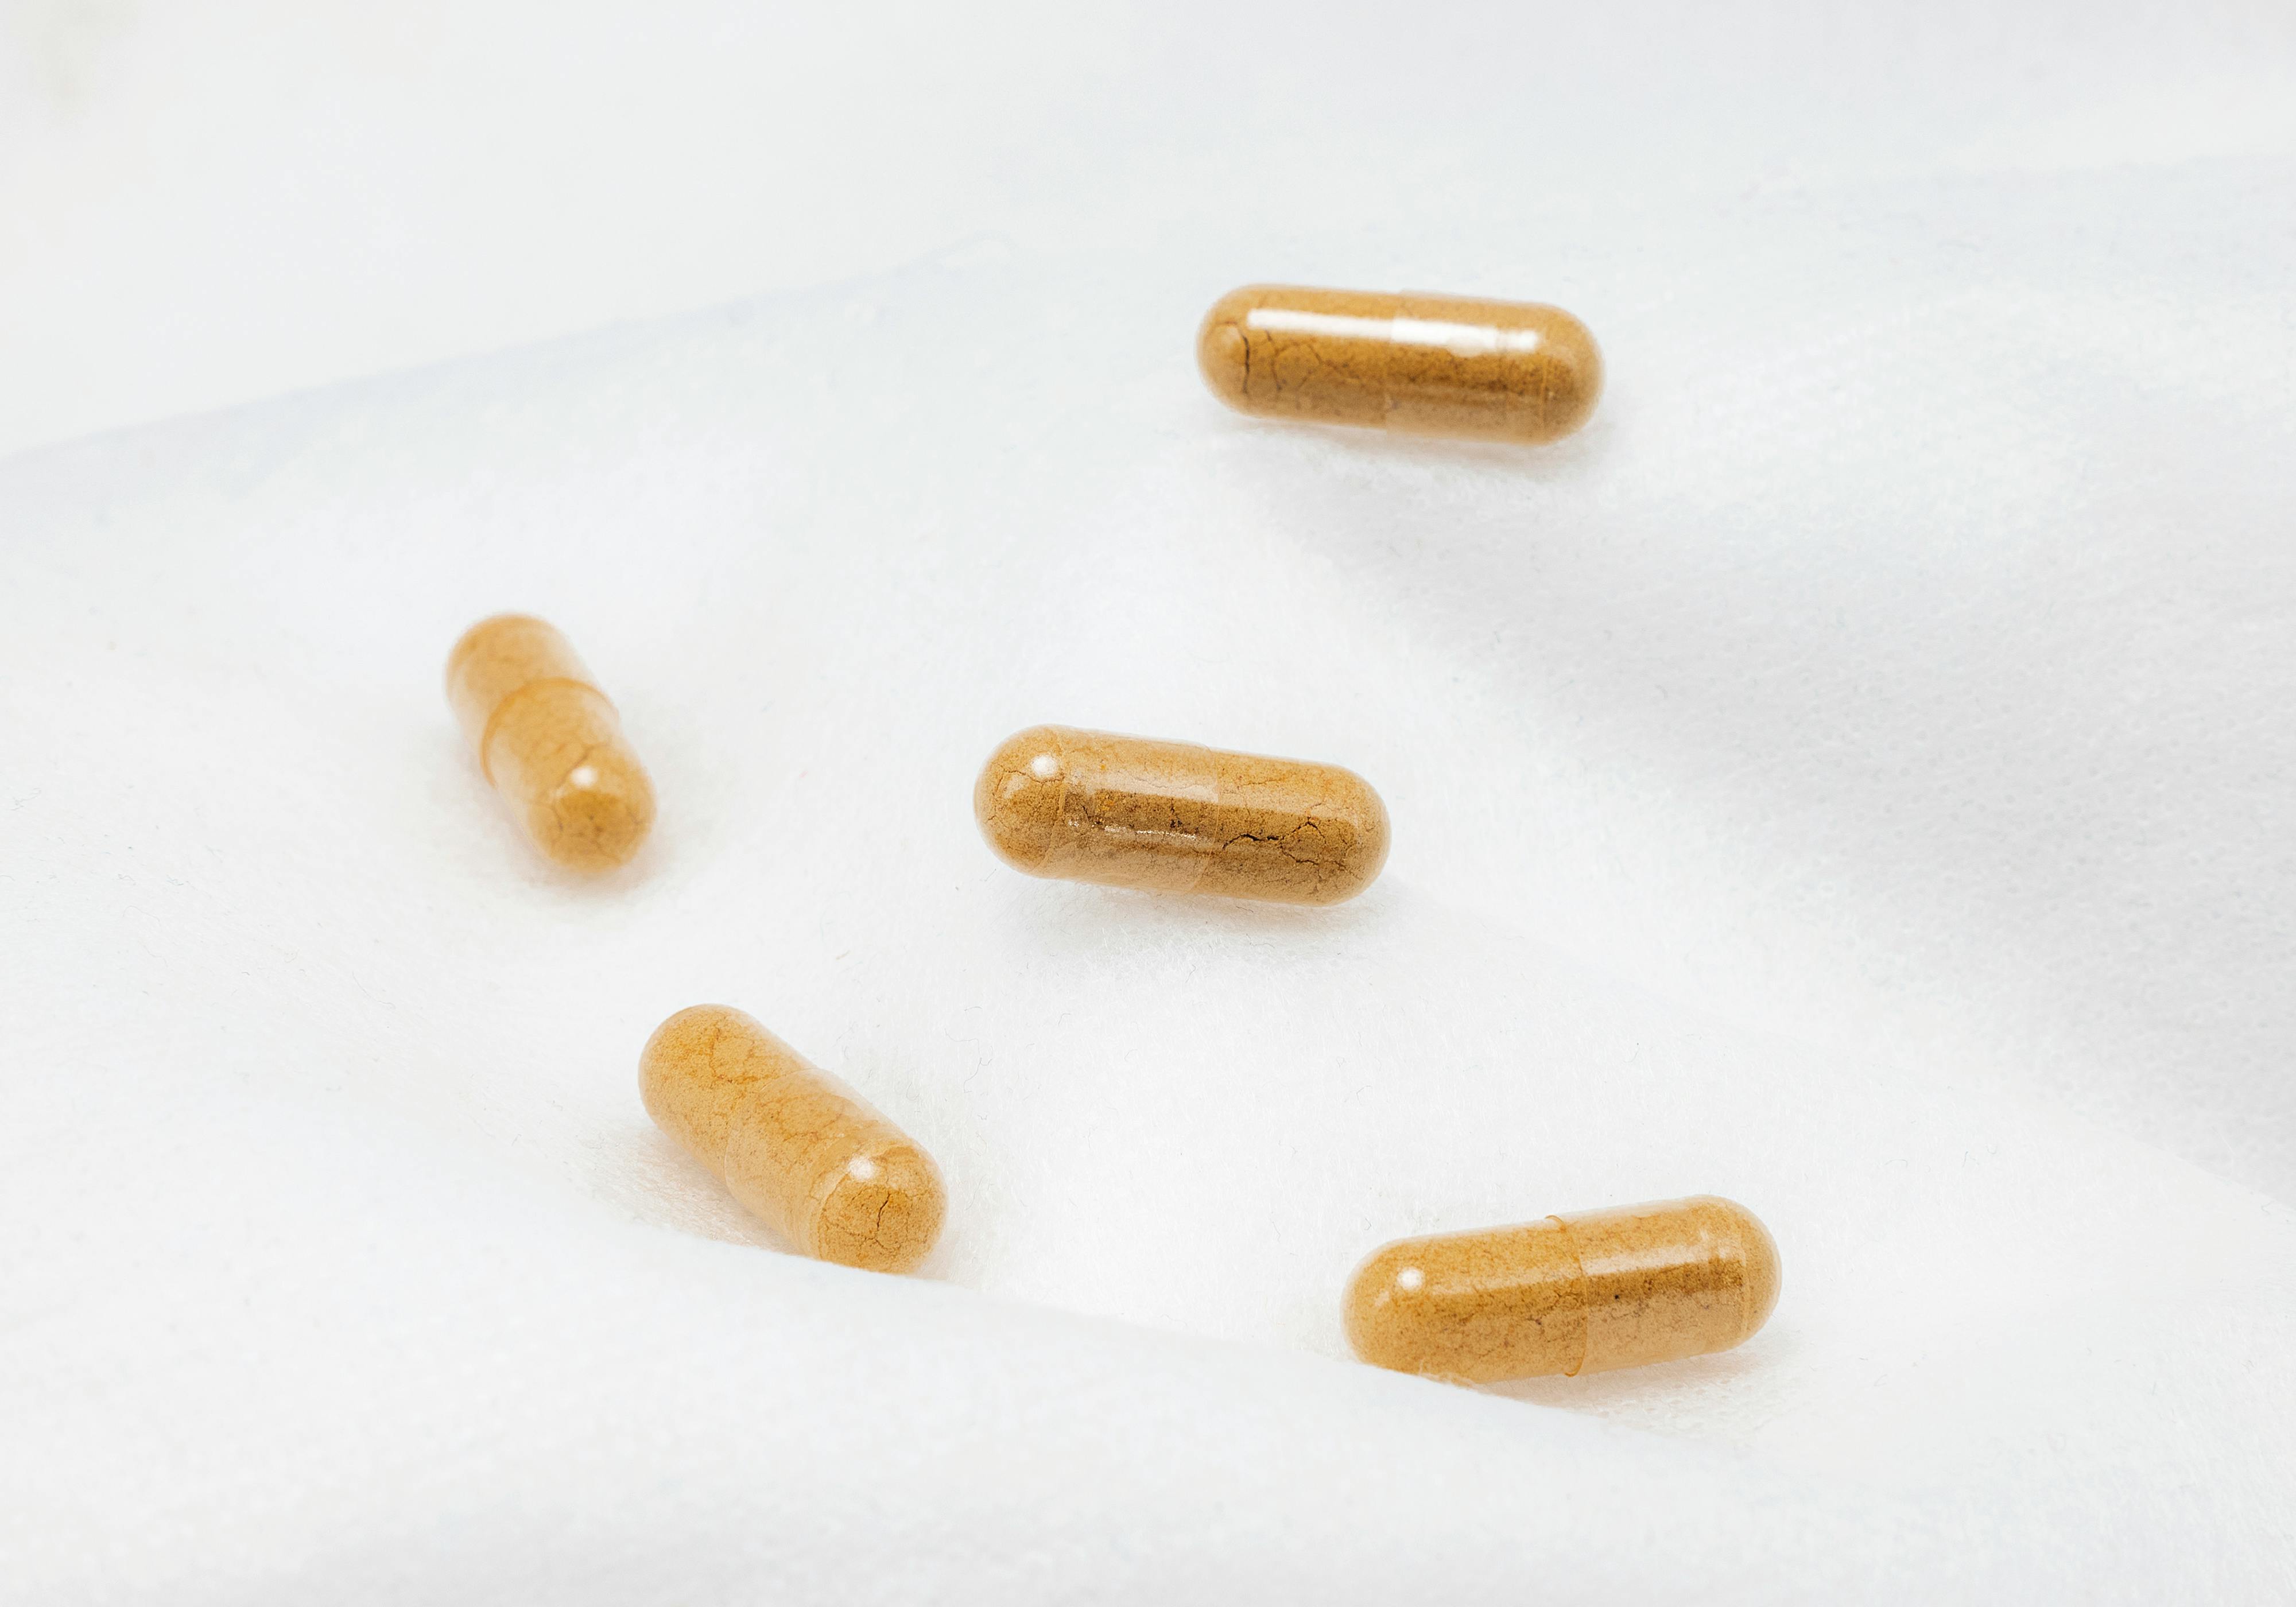 capsule supplements on white surface